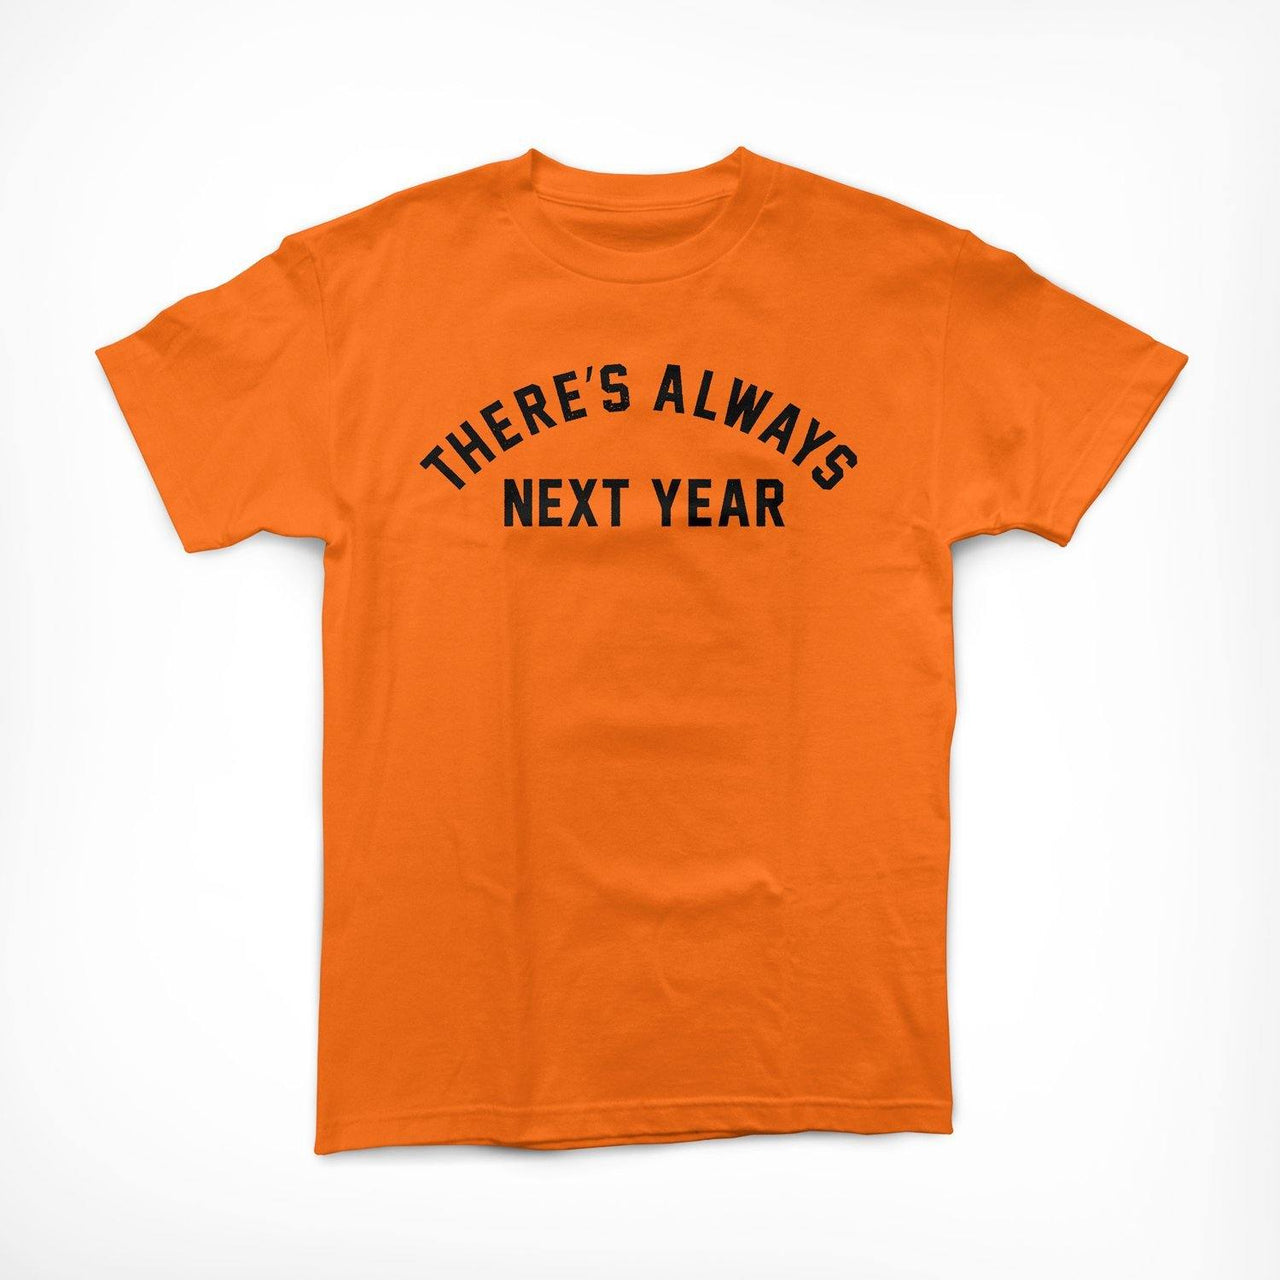 Buy – Cracked Bell "There's Always Next Year" Shirt – Band & Music Merch – Cold Cuts Merch